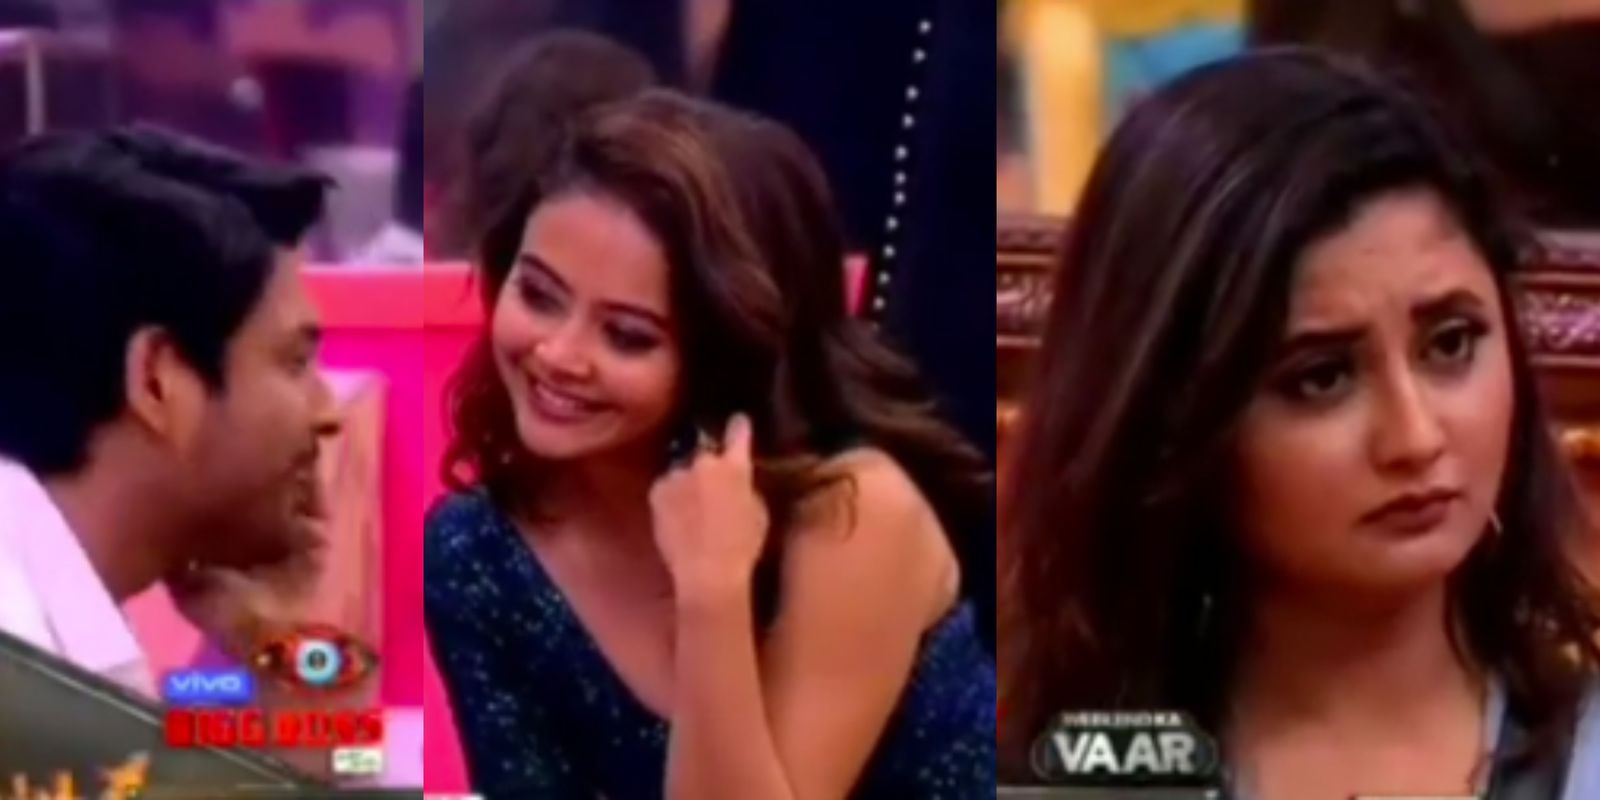 Bigg Boss 13 Preview: Devoleena Bhattacharjee To Re-Enter, Will Flirt With Sidharth And Drop Truth Bombs To Rashami